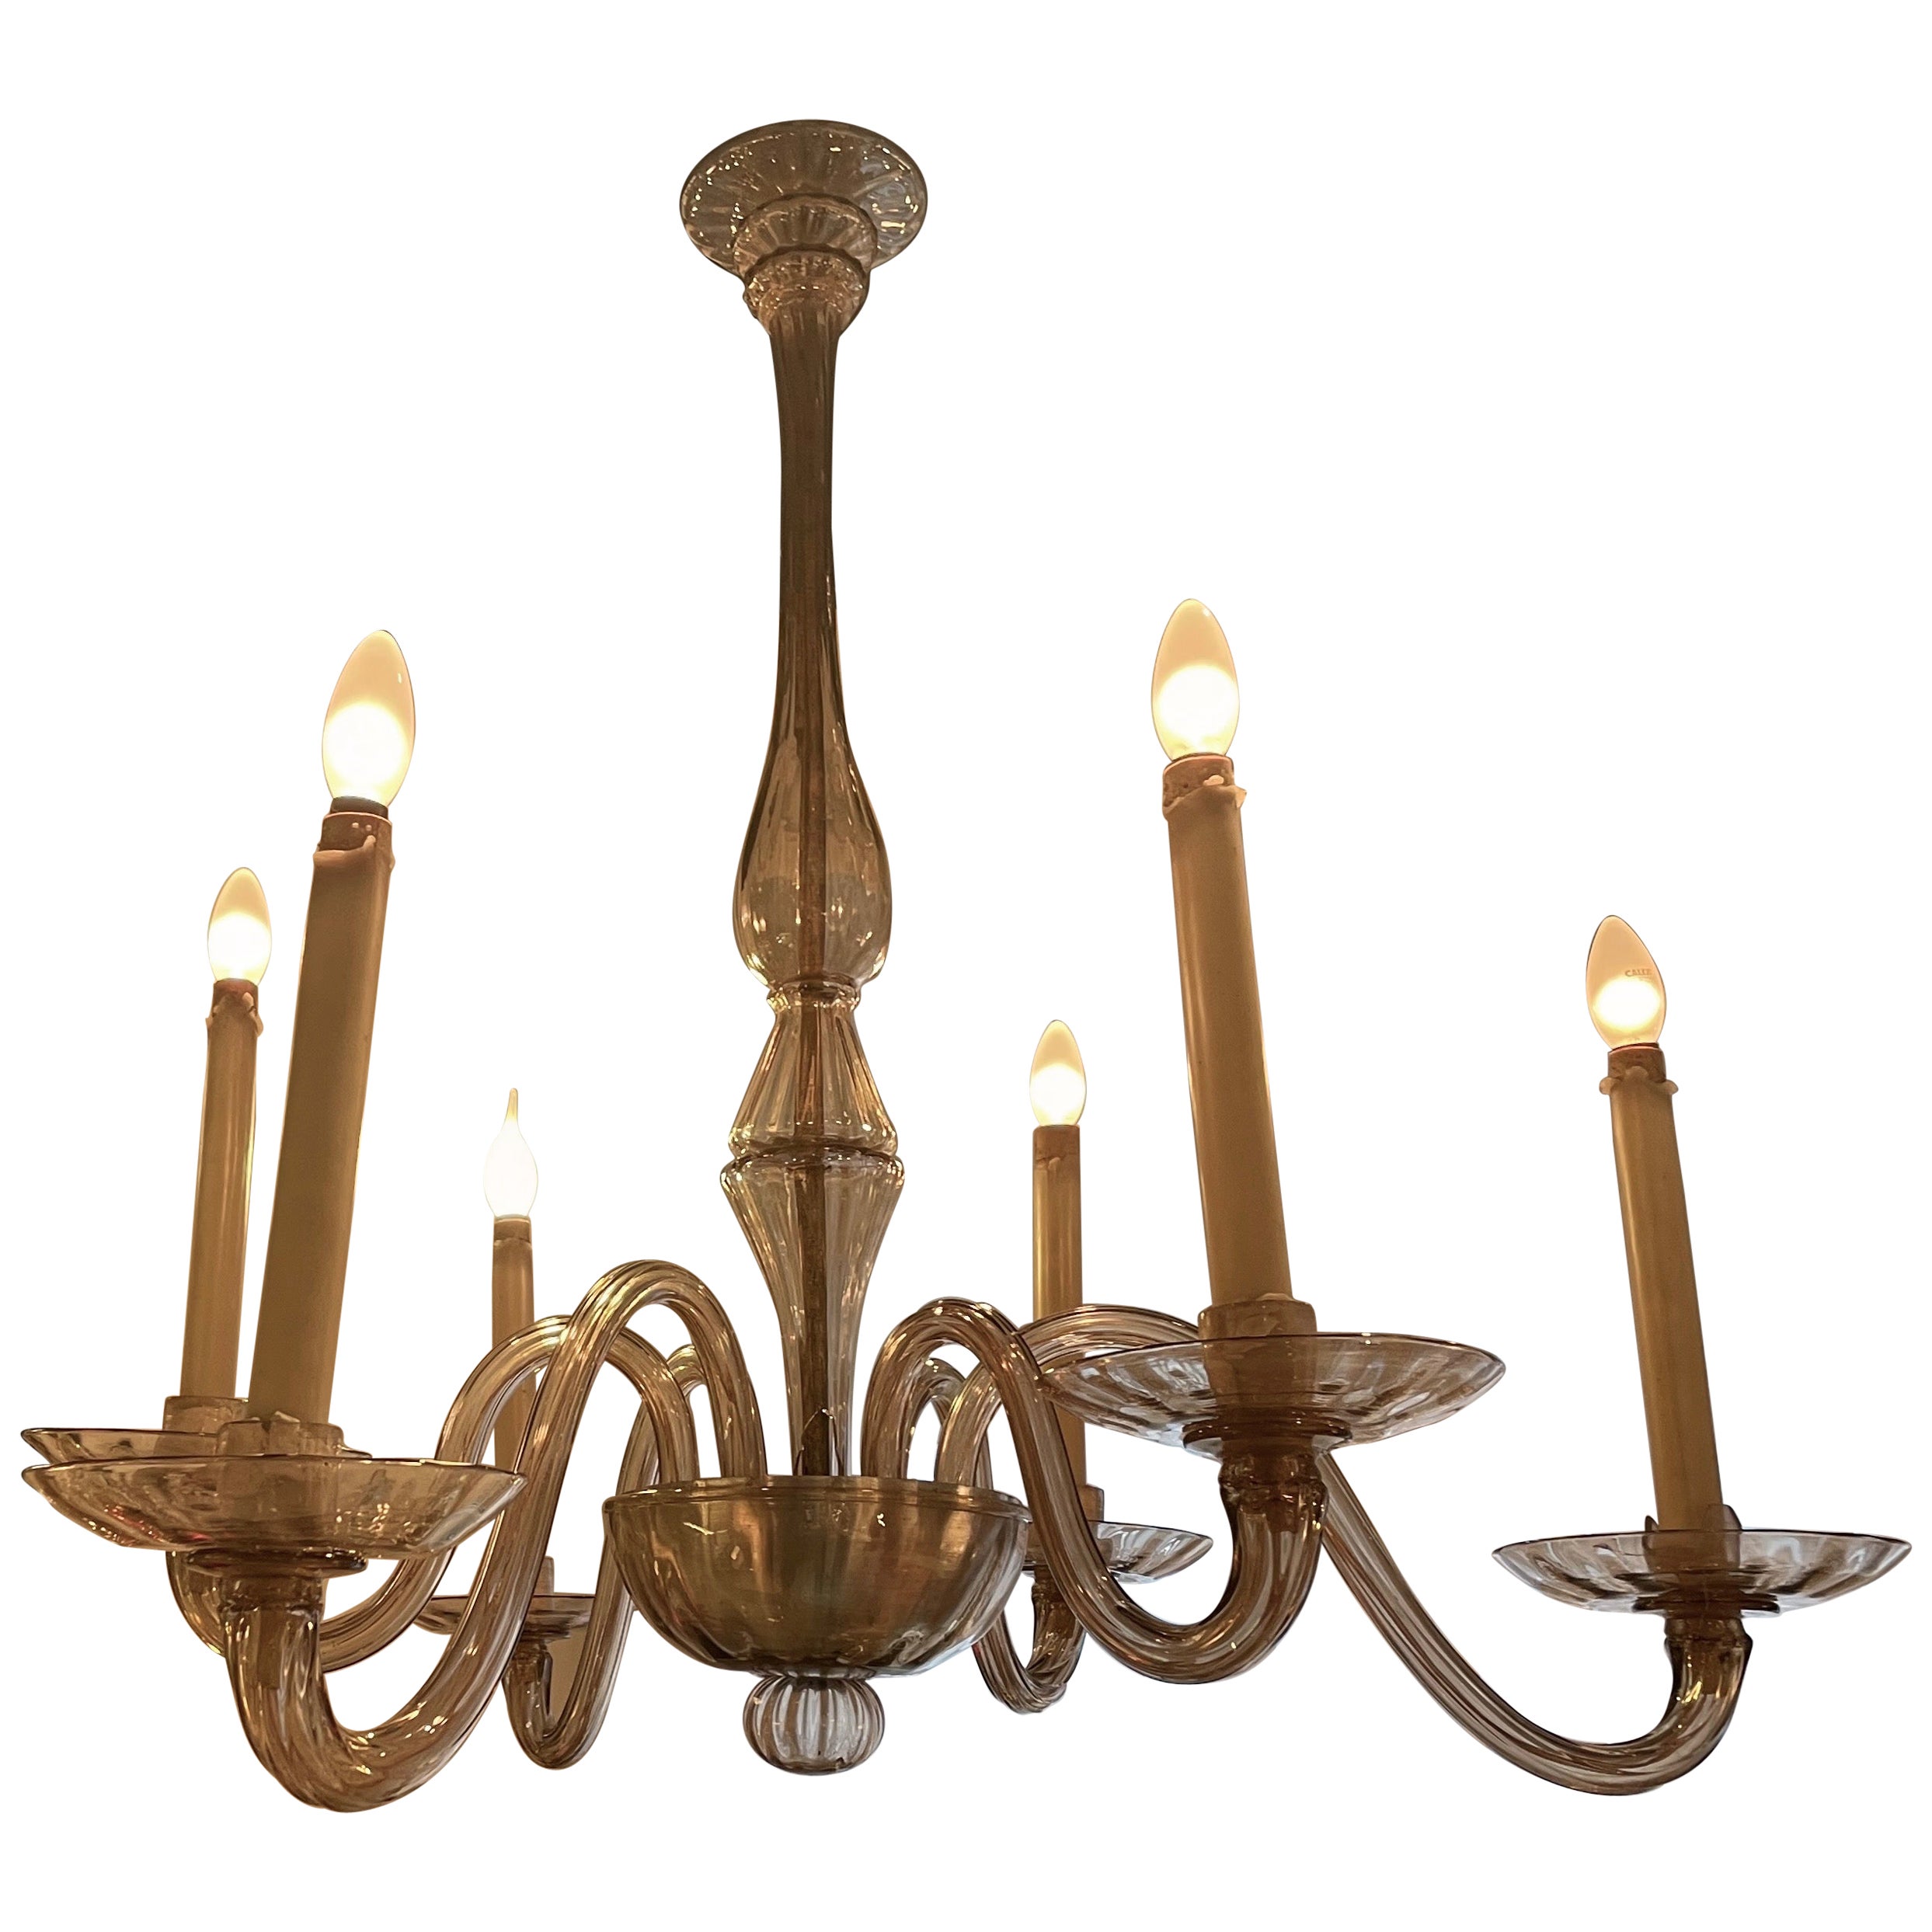 Elegant Six Arms Amber Chandelier by Venini, Italy 1930. For Sale